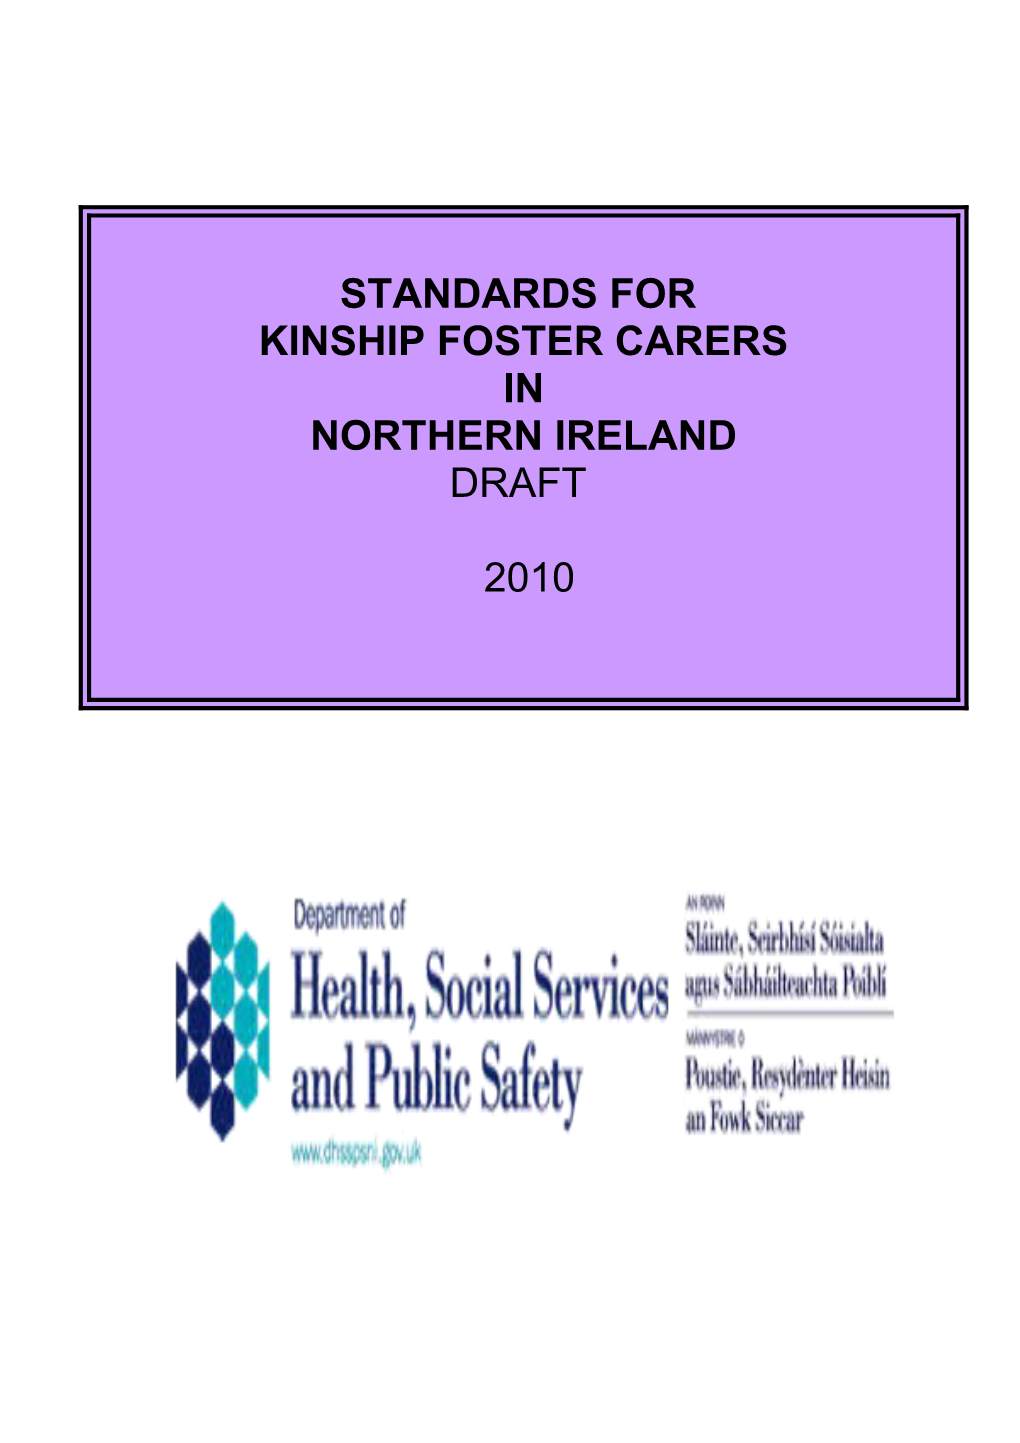 Copies of the Draft Standards Can Be Accessed on the DHSSPSNI Website